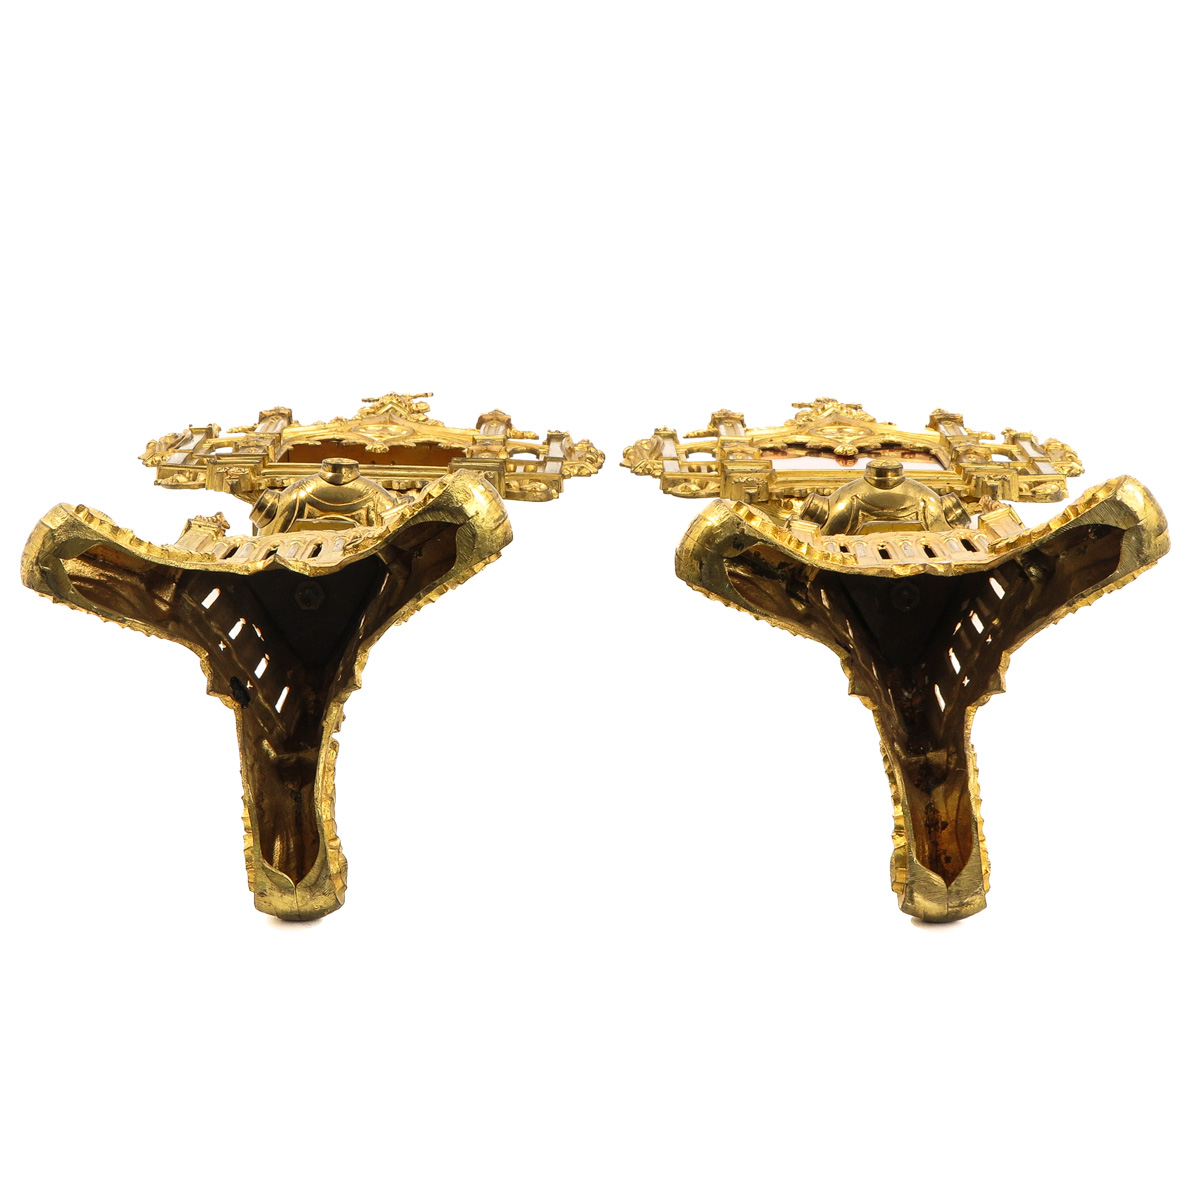 A Pair of Neo Gothic Gilded Reliquaries - Image 6 of 10